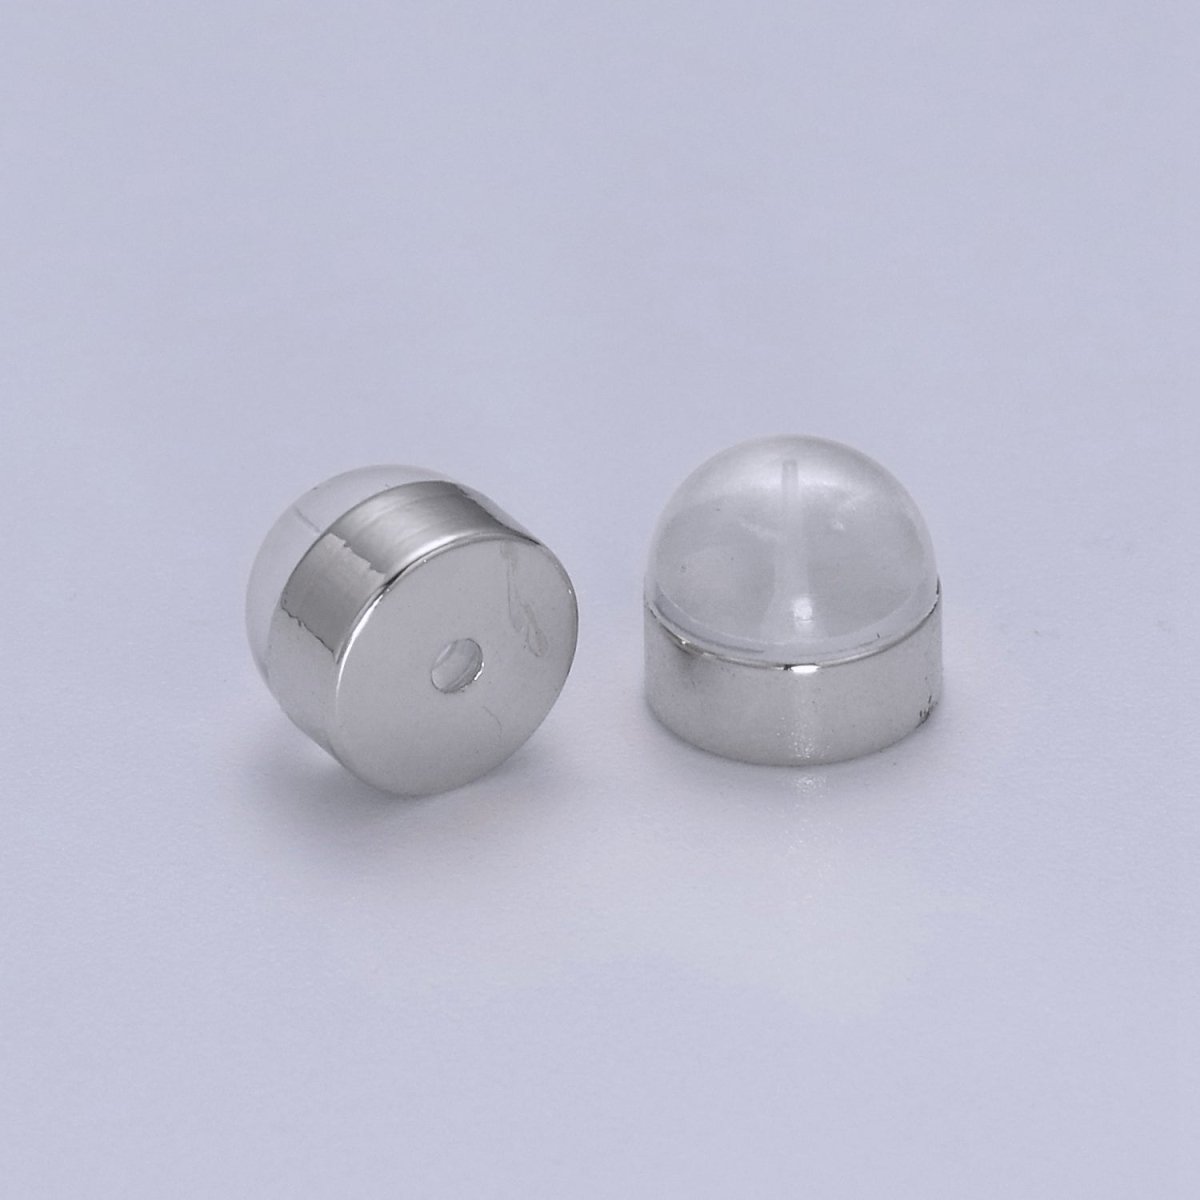 Soft Silicone Earring Backs for Studs Gold/Silver Rubber Earring Backs Replacements Hypoallergenic Safety Plastic Earring Back for Earring K-217 - DLUXCA